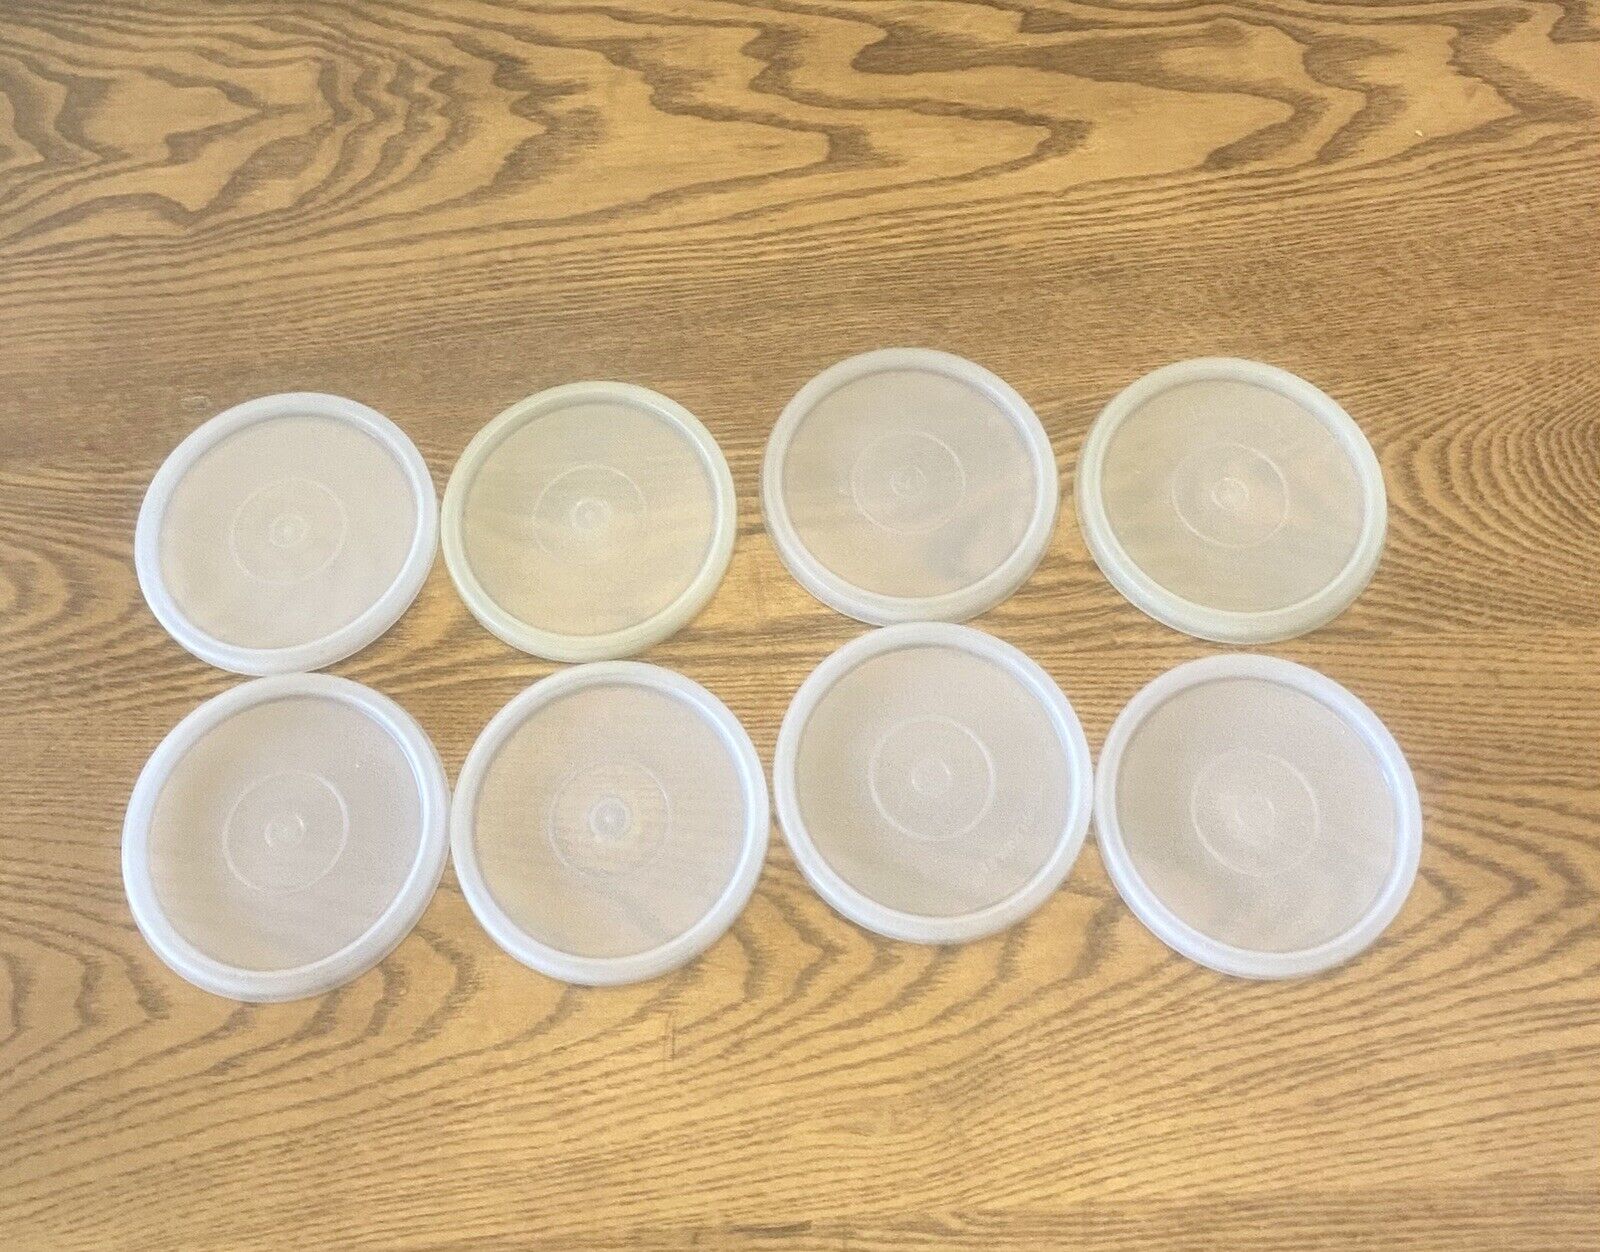 Lot of 8 - Vintage TUPPERWARE #1347 Replacement Seal Lids For 18oz Tumblers